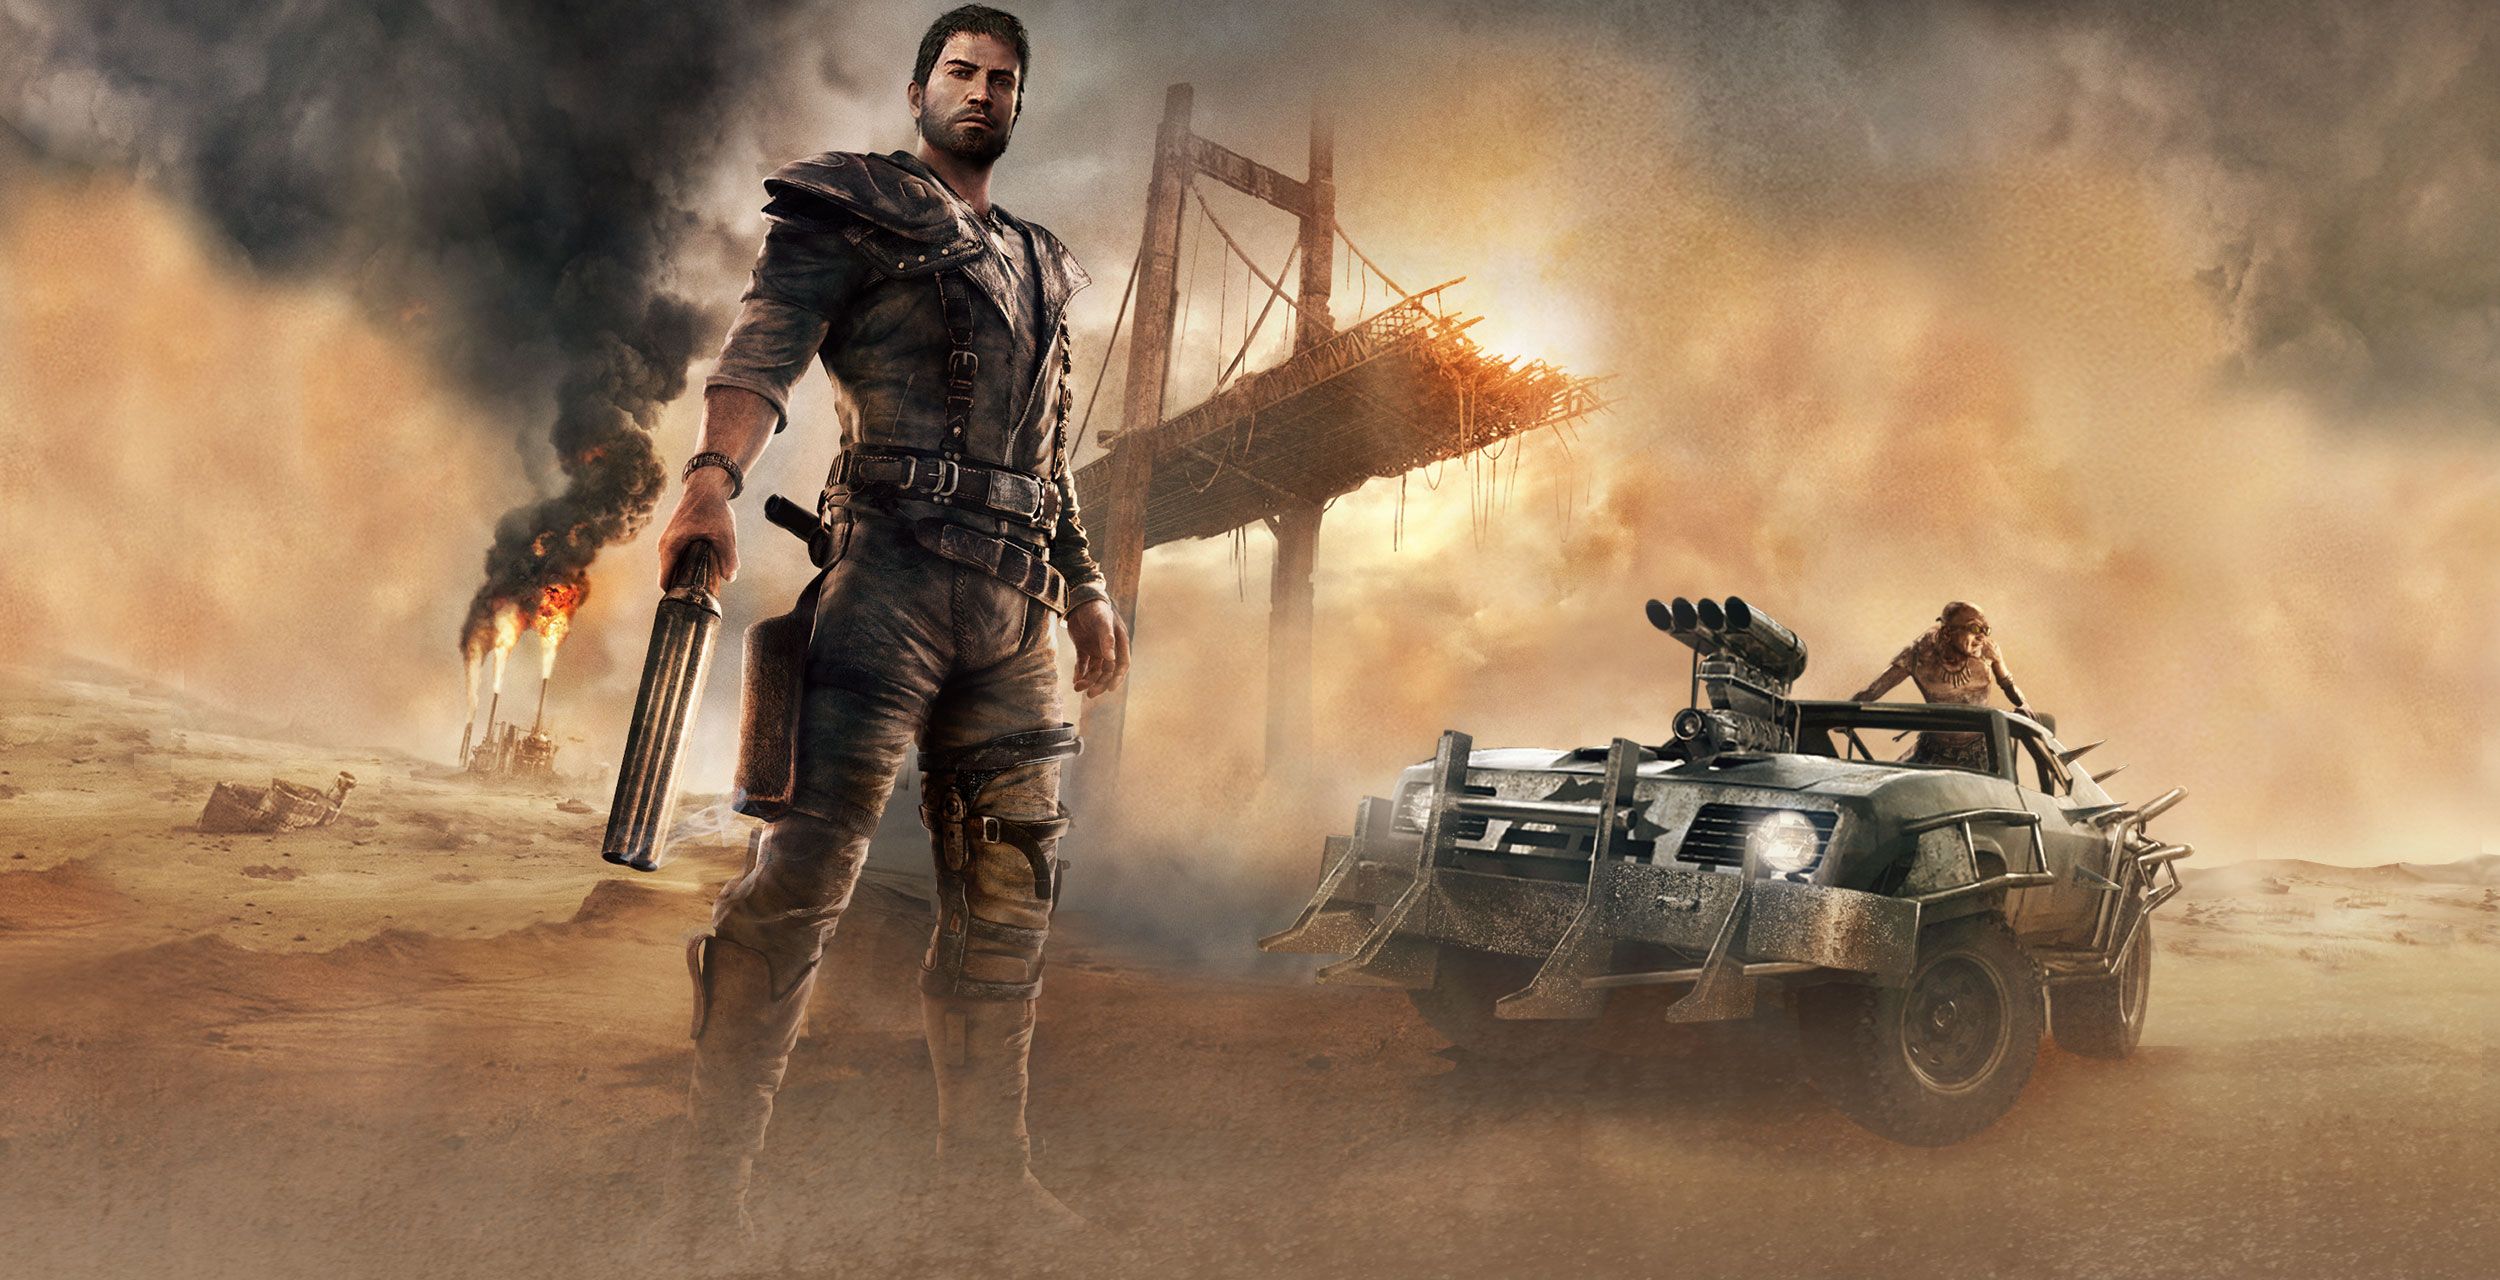 560307 3840x2886 mad max 4k pc wallpaper free download hd - Rare Gallery HD  Wallpapers